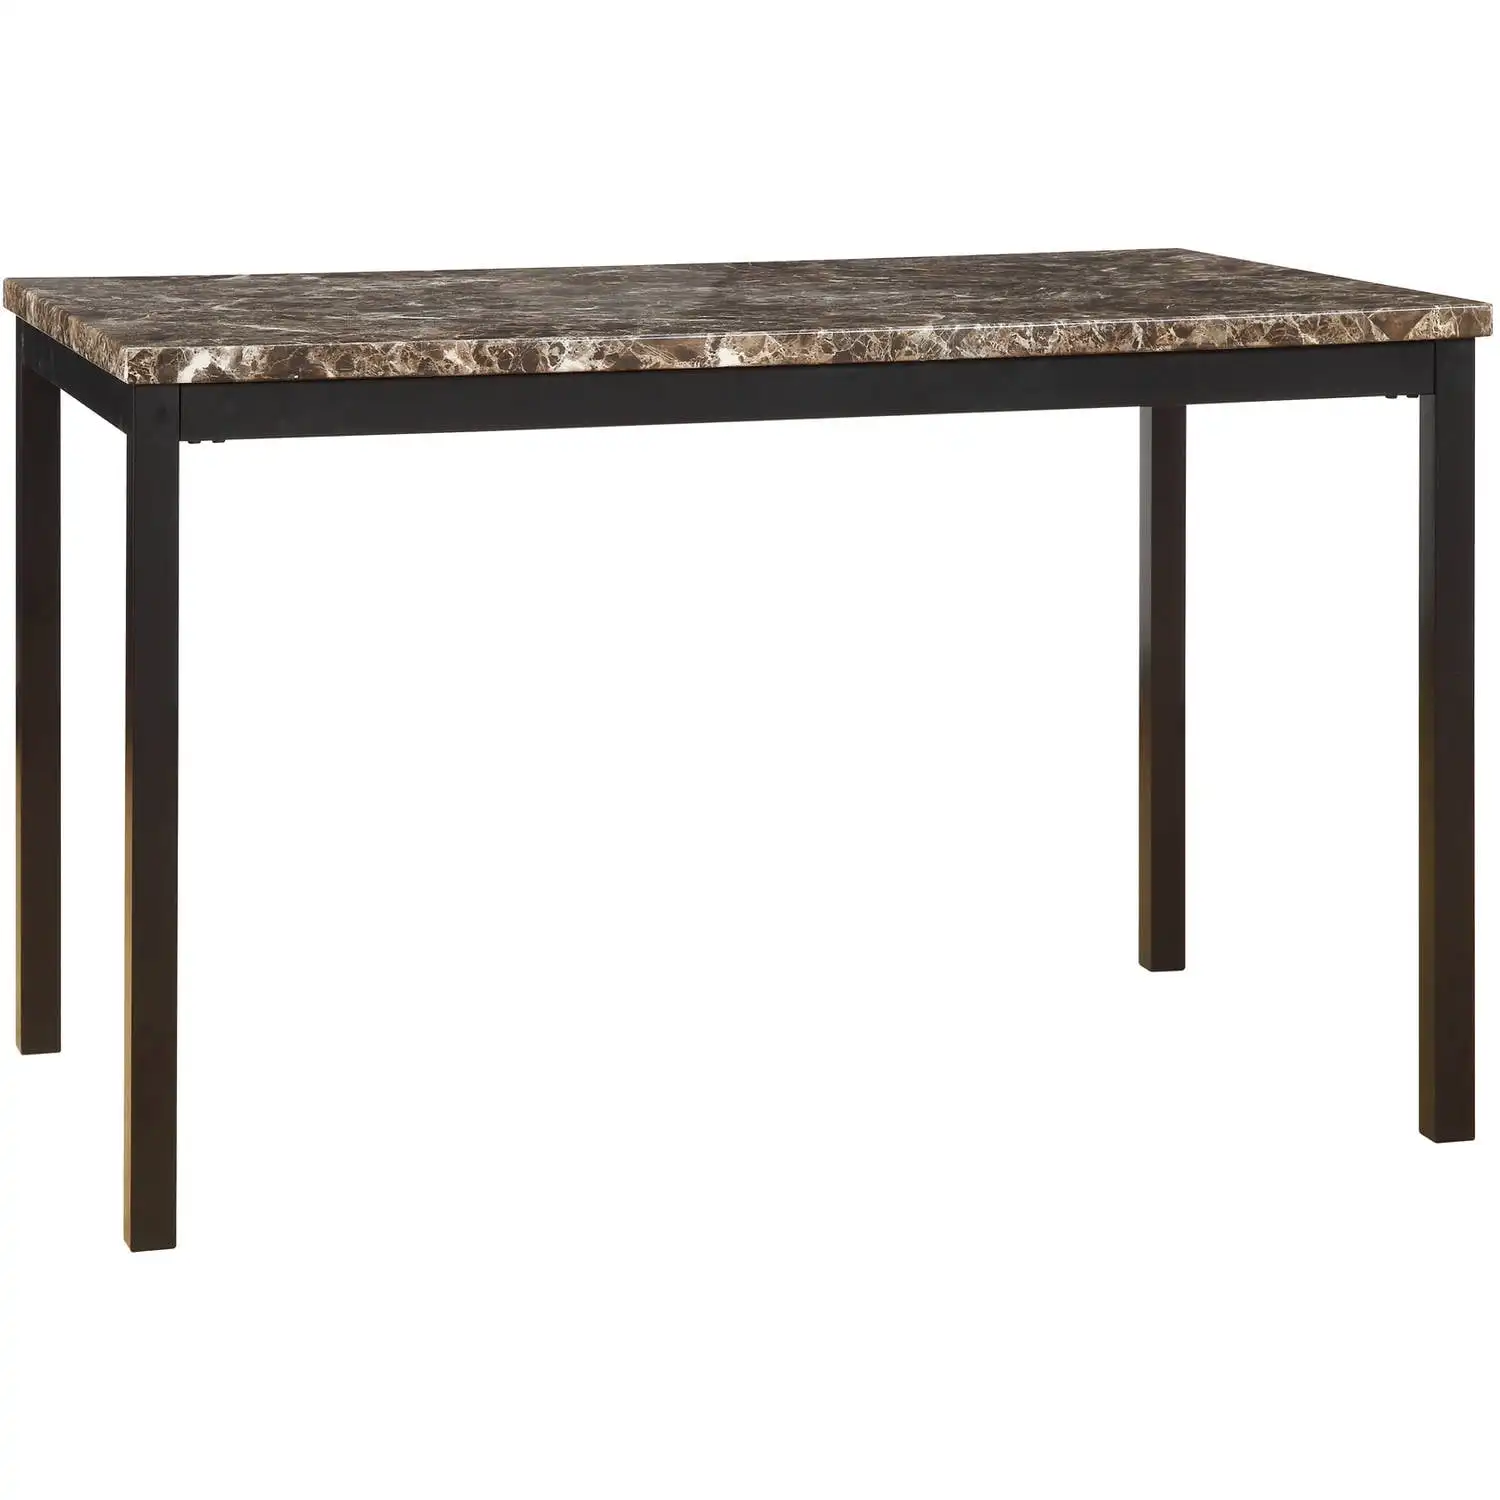 

Weston Home Declan Black Finish Frame with Faux Marble To 48" Dining Table